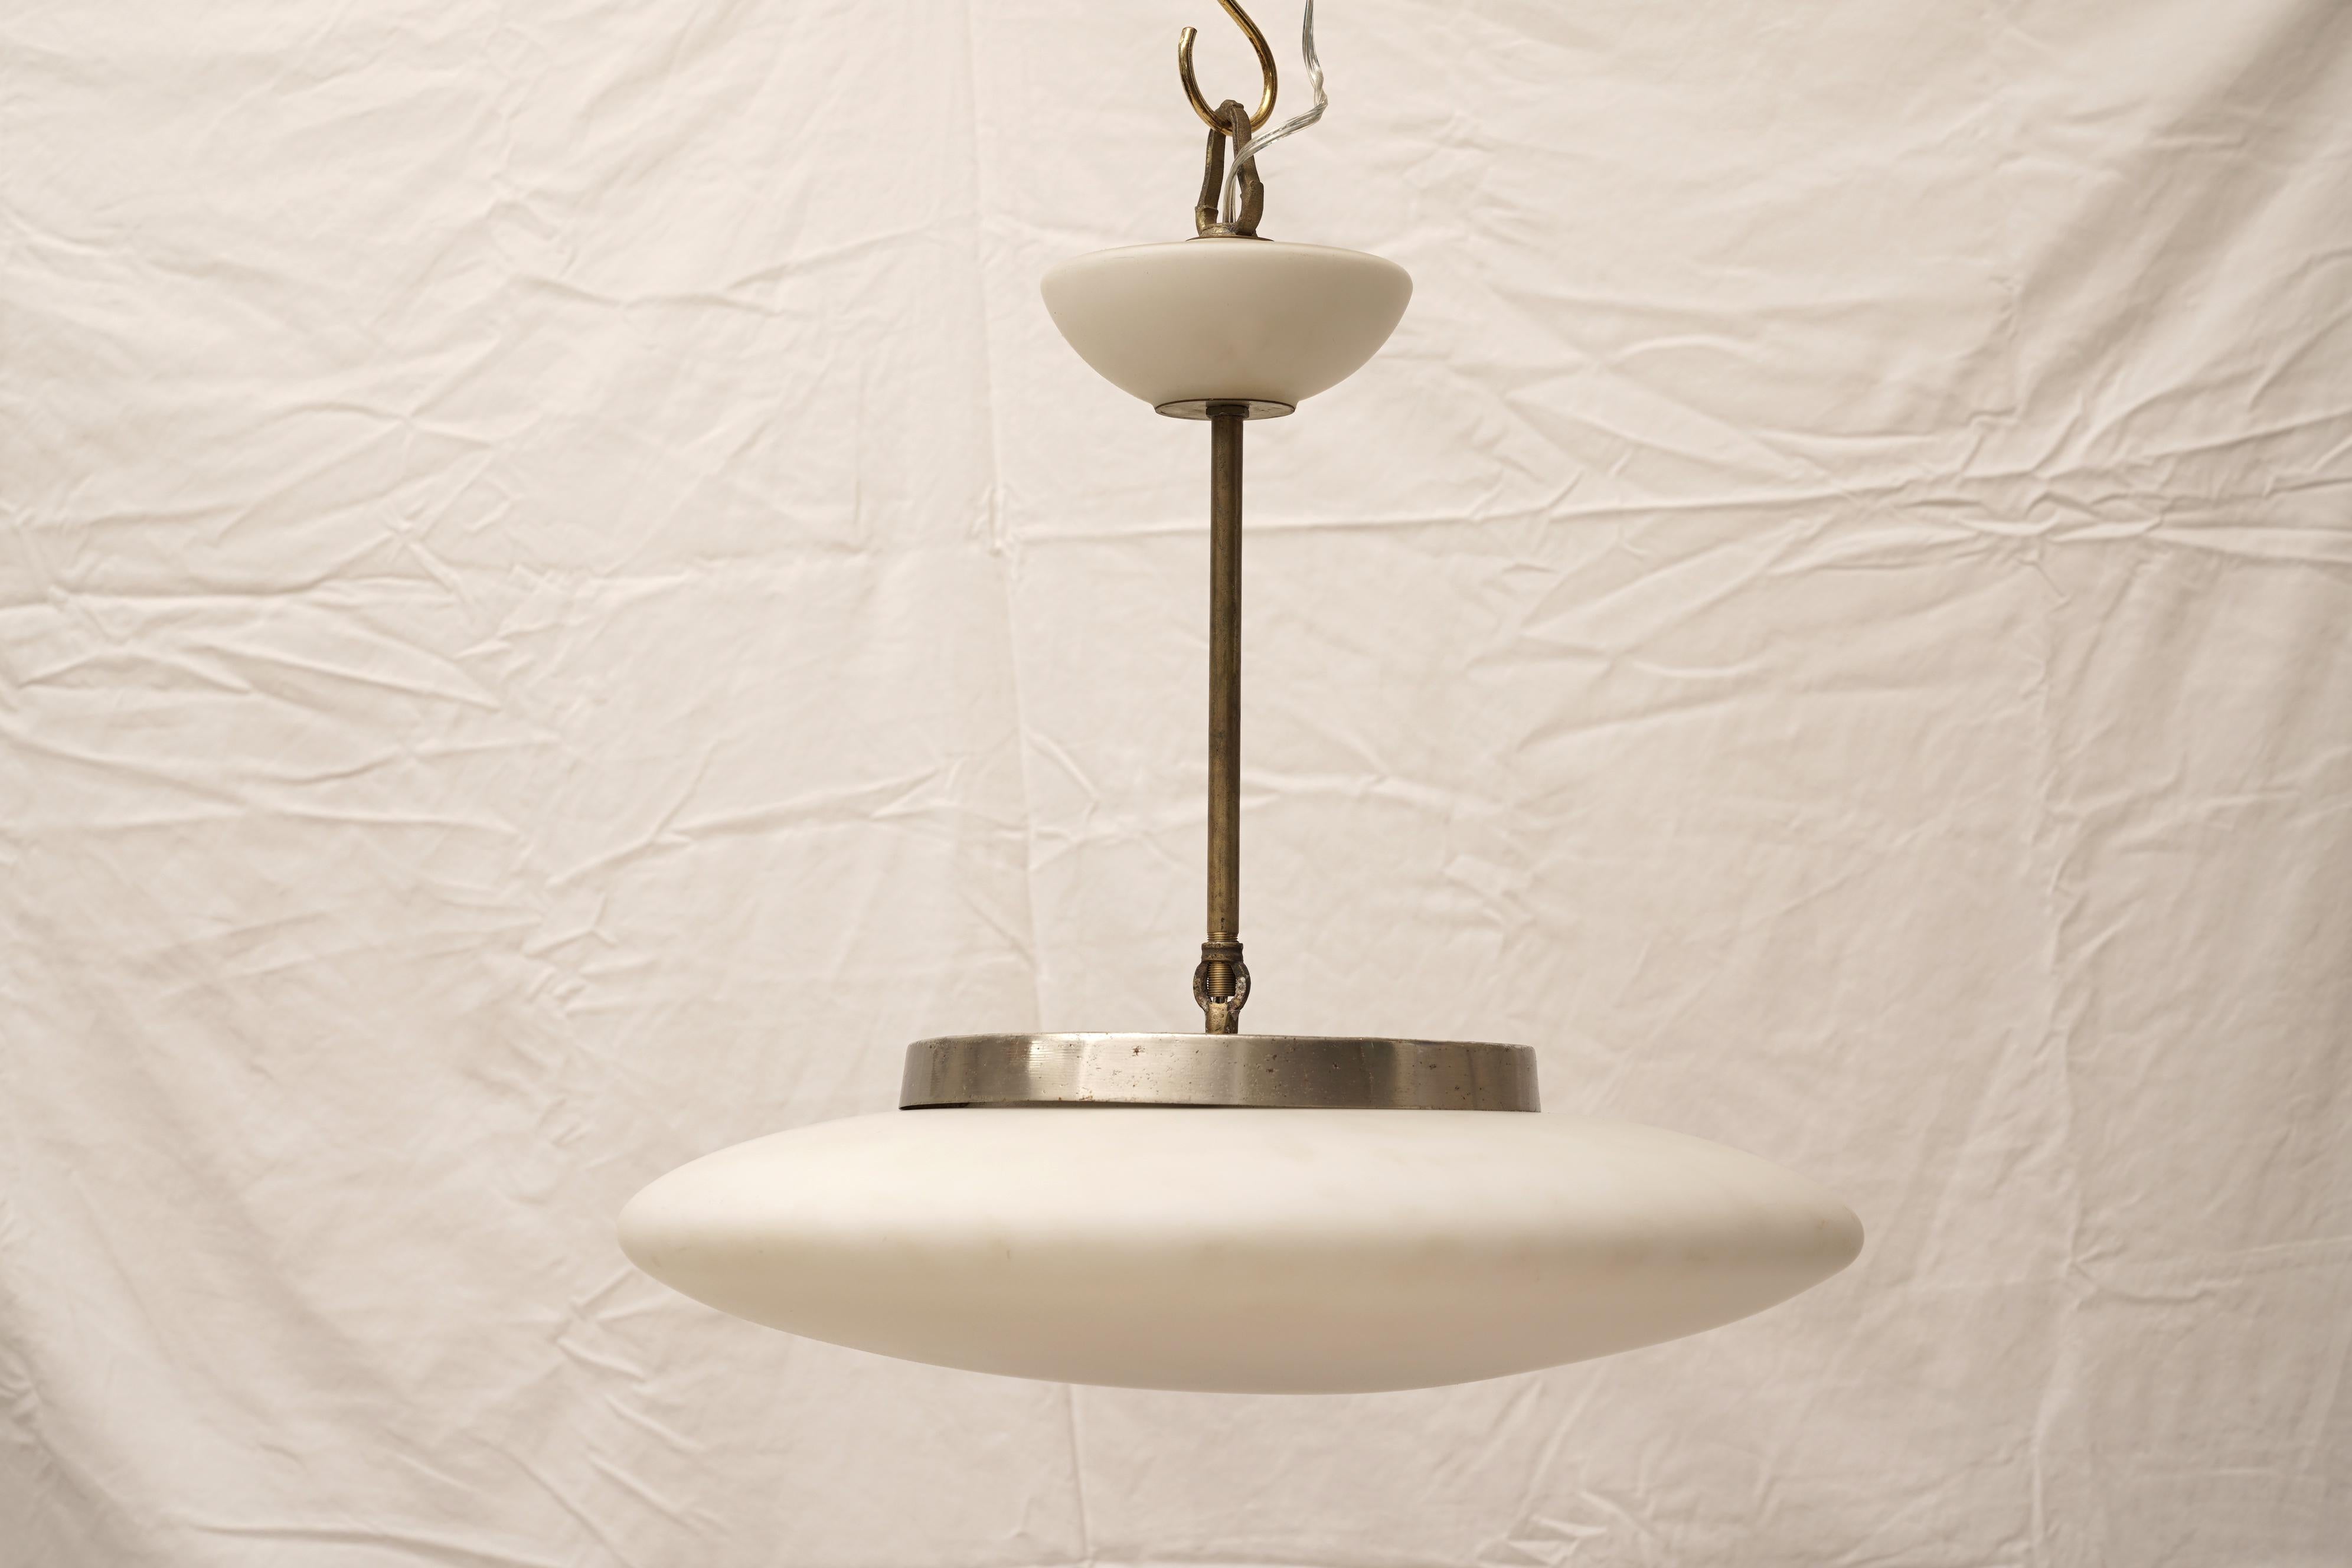 A great, sculptural form, this saucer-shaped, white opaque glass ceiling pendant. Complete with matching glass ceiling canopy. Mid-Century Modern, European. Rewired for American use. If you need additional length, I can supply brass or chrome chain